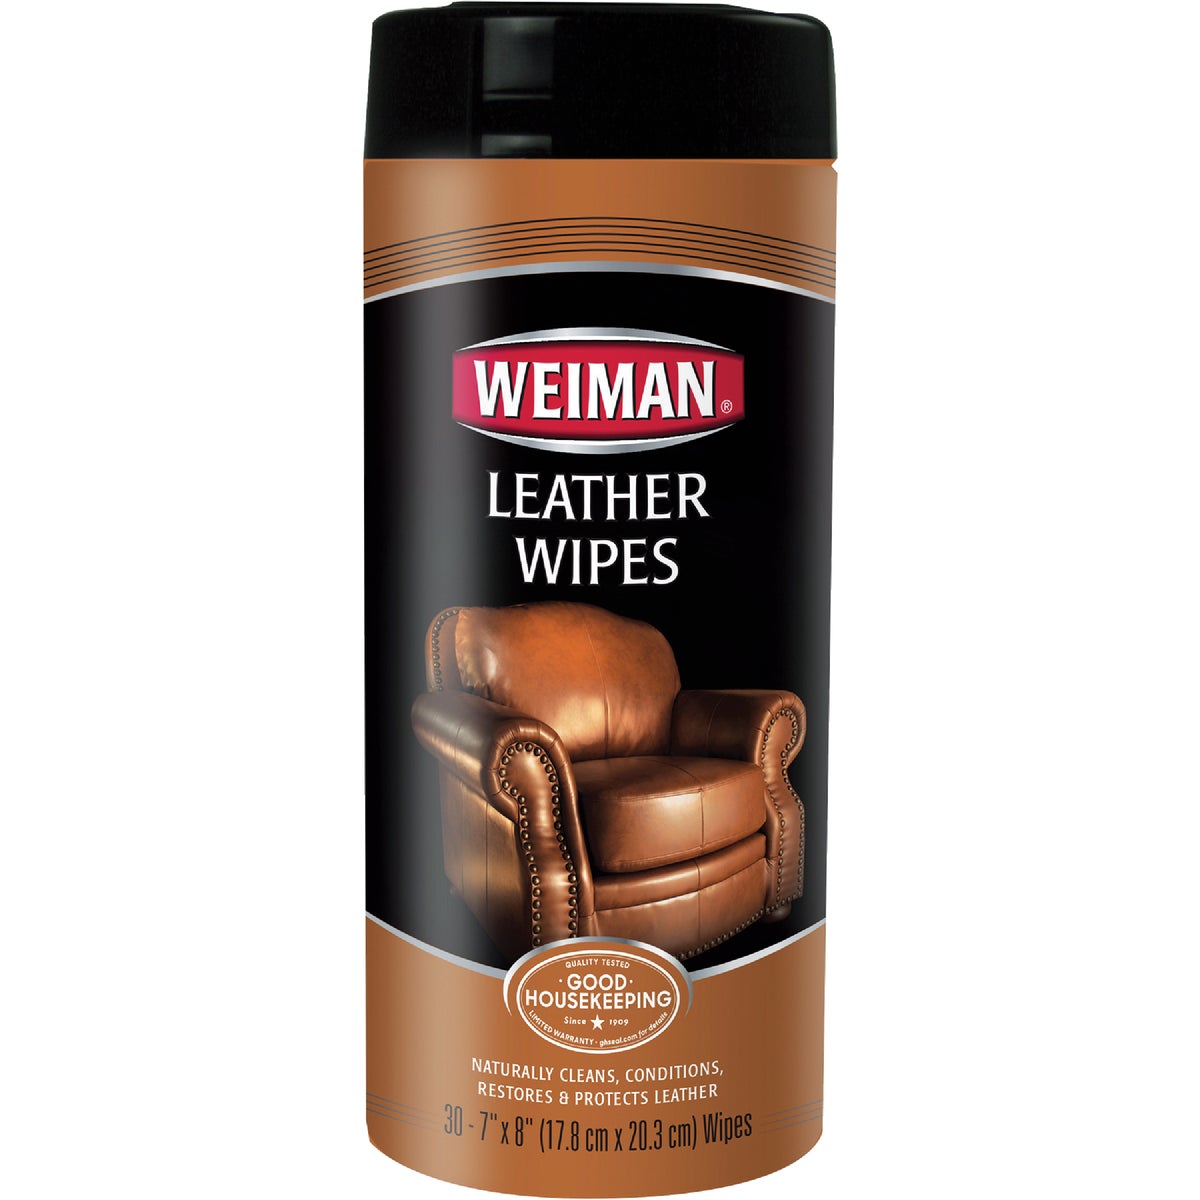 Weiman Leather Care Wipes (30-Count)